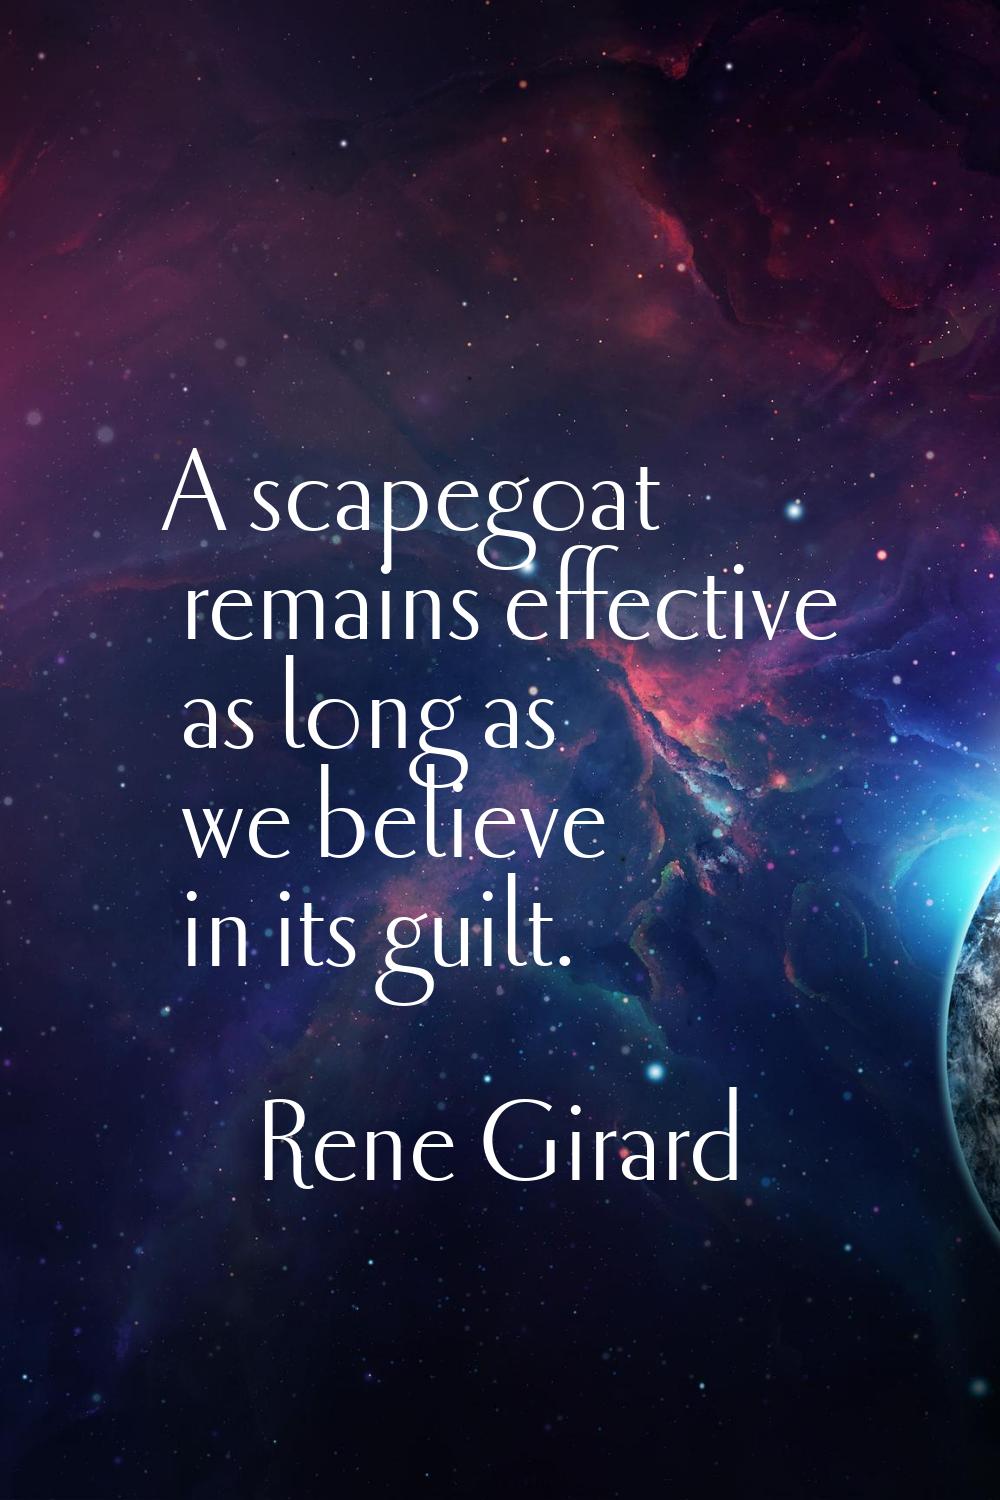 A scapegoat remains effective as long as we believe in its guilt.